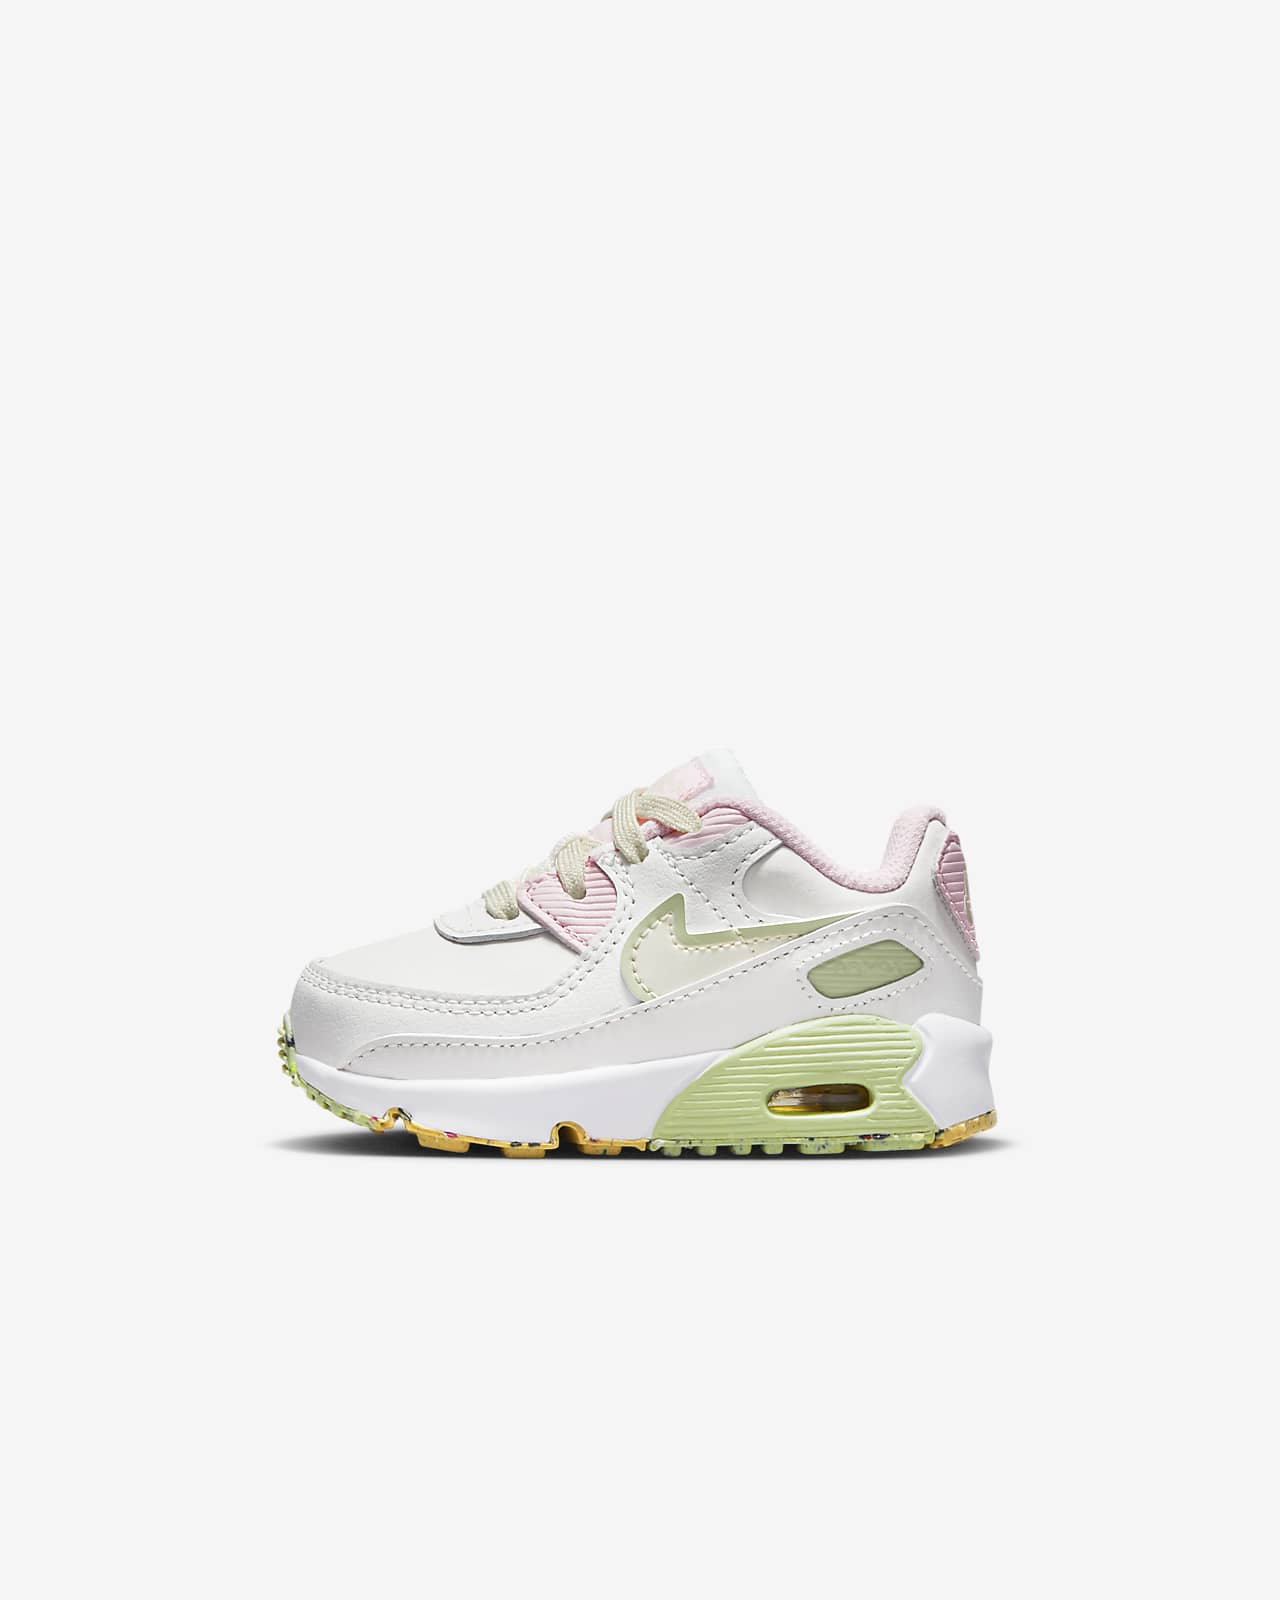 Nike Air Max 90 LTR SE Baby & Toddler Shoes